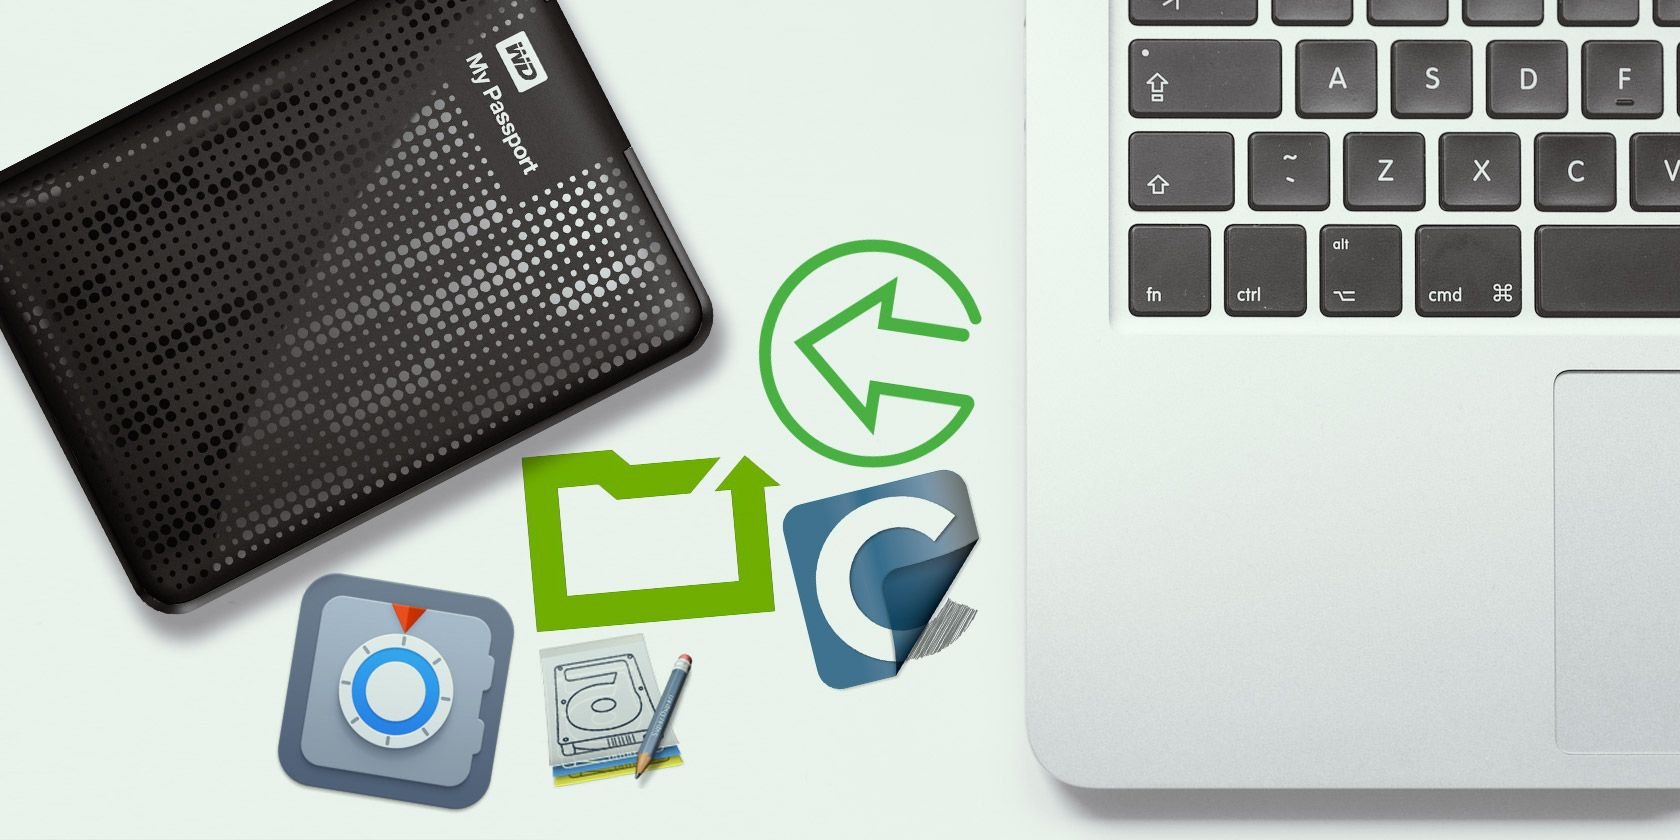 8 Mac Time Machine Alternatives for Backing Up Your Data